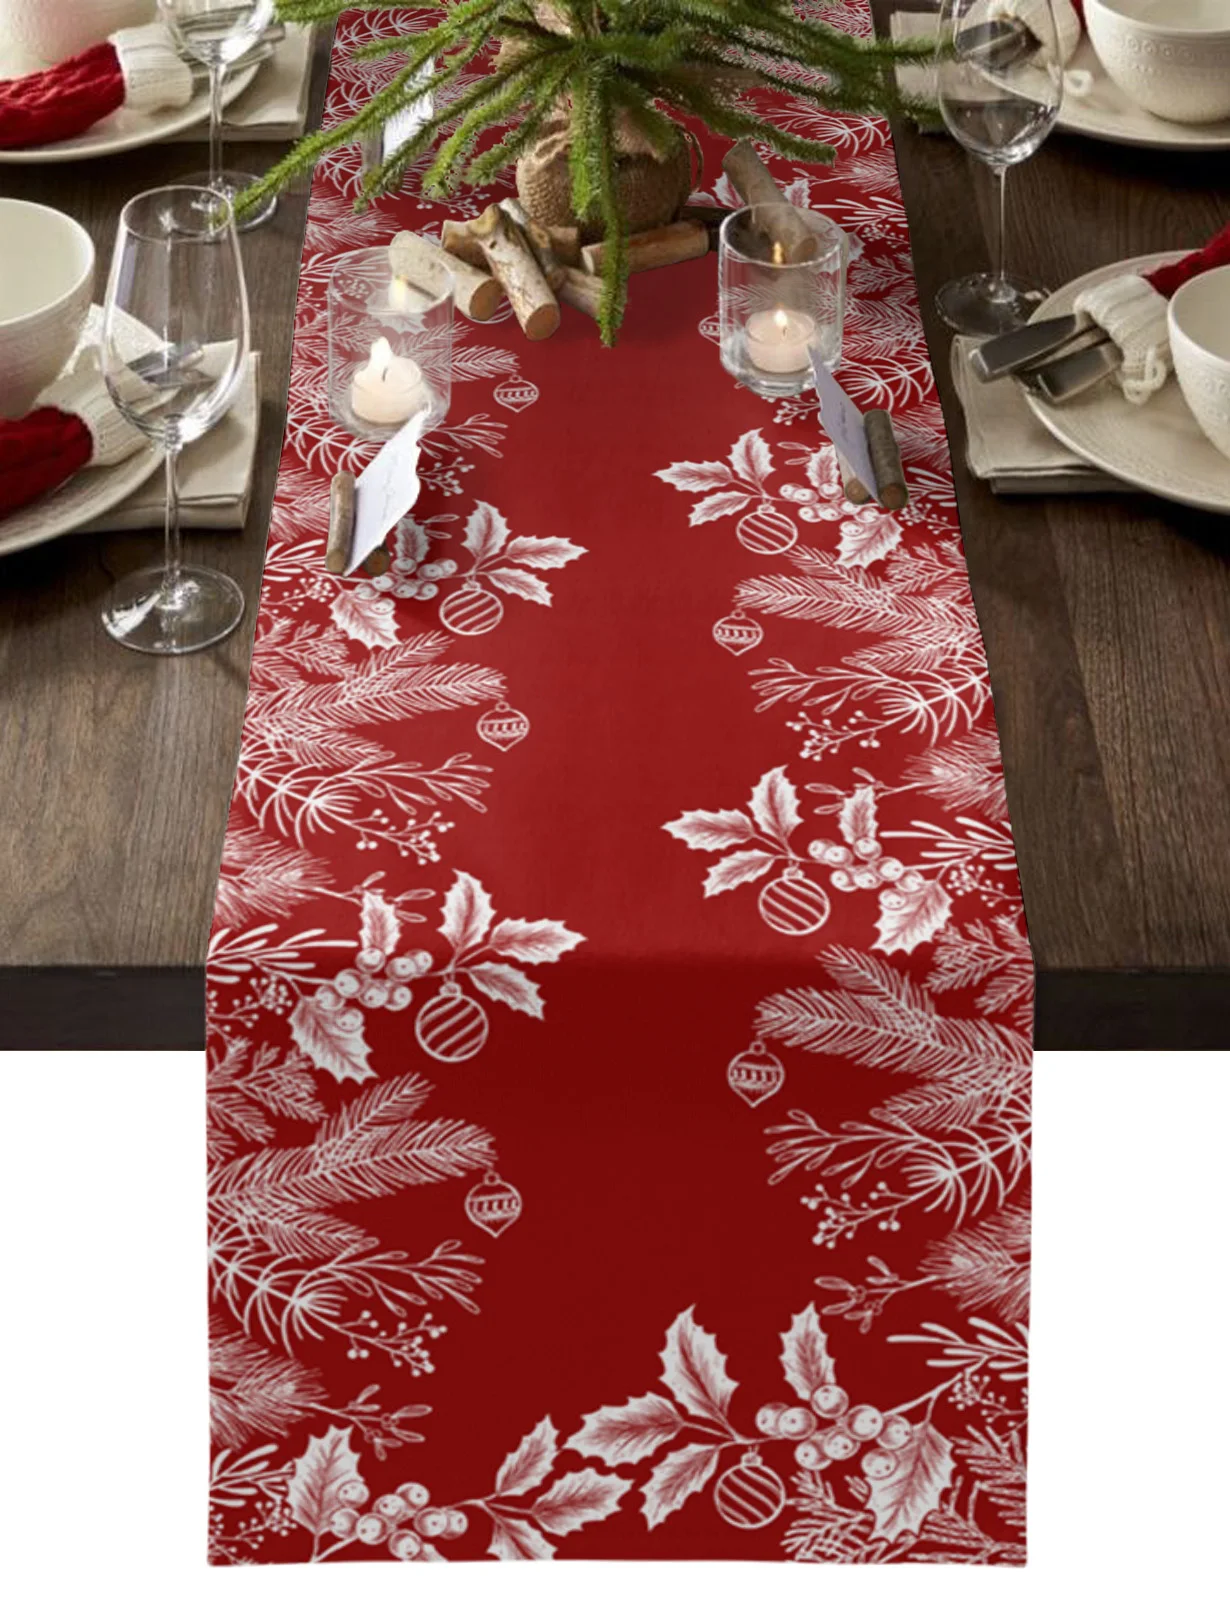 

Christmas Pine Needles Leaves Pine Cones Table Runner Christmas Dining Table Decor Linen Table Runners Wedding Decor Table Cloth